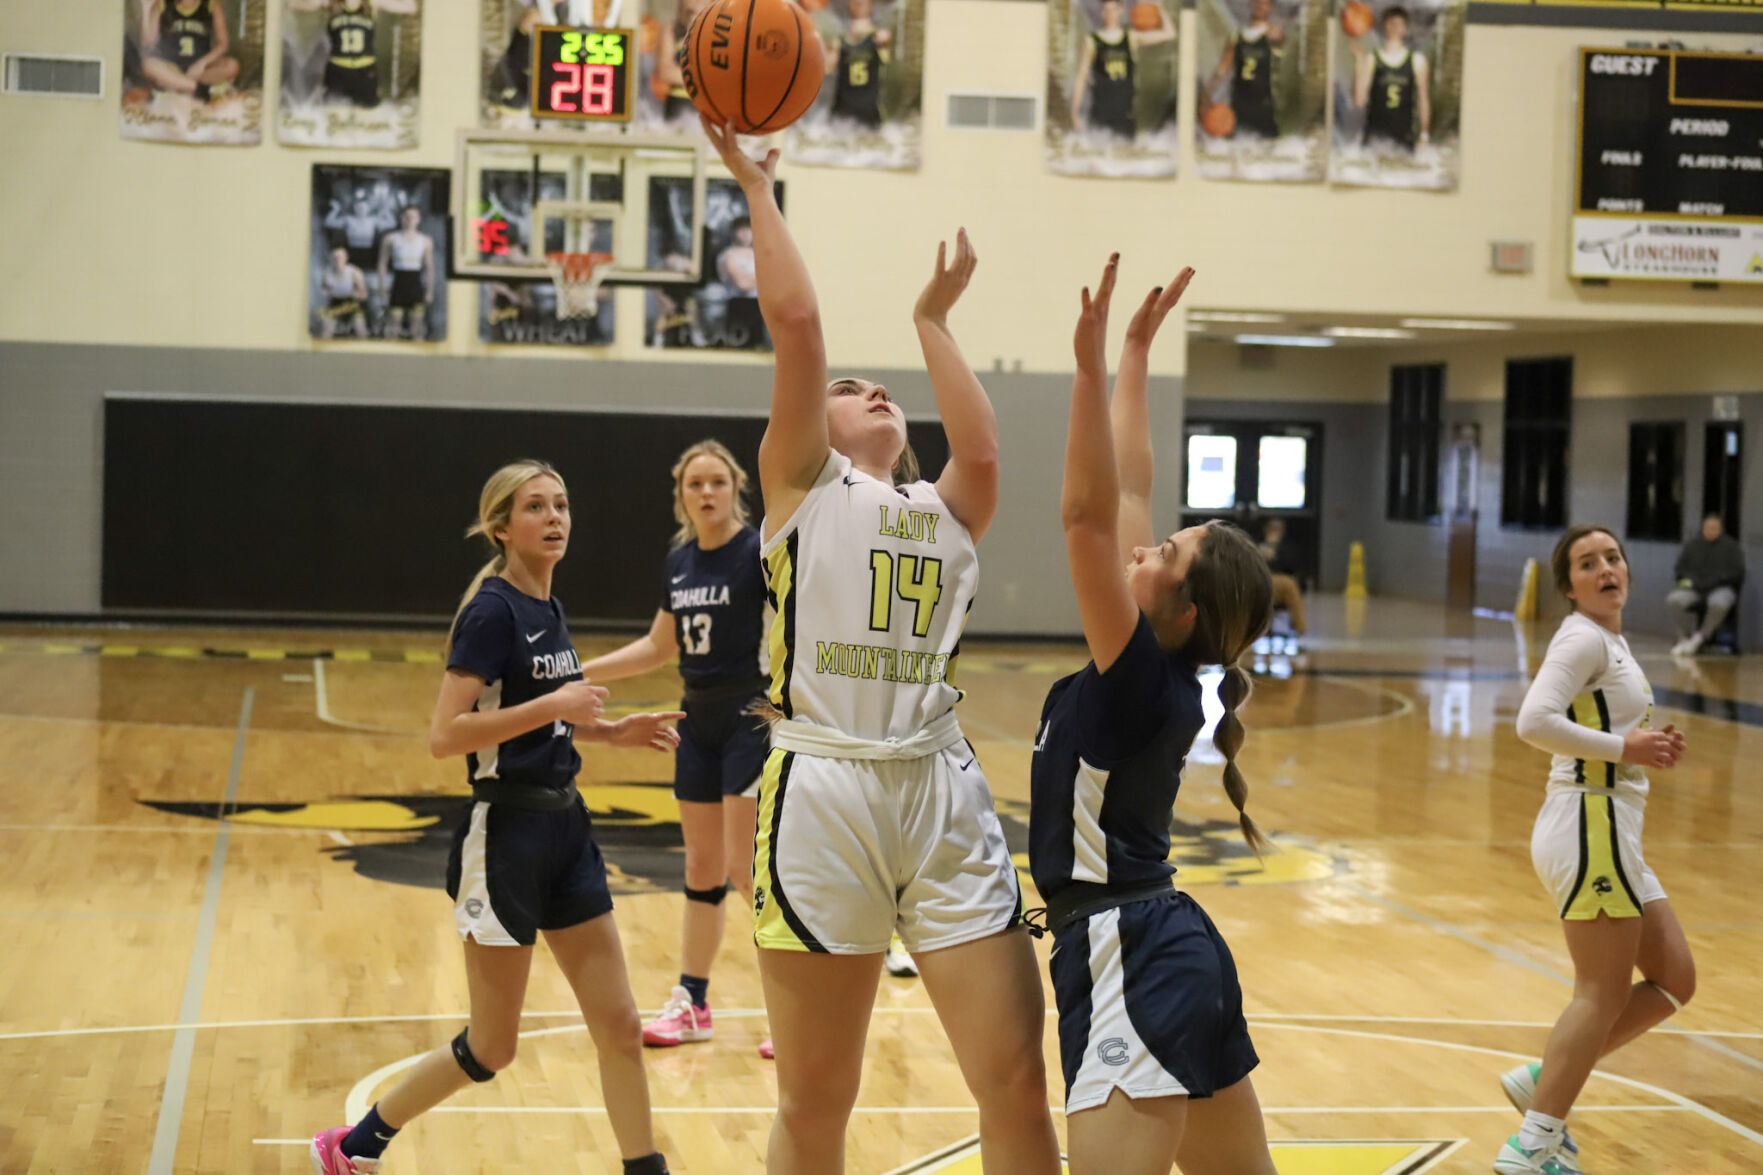 Exciting Basketball Action at North Murray’s Mistletoe Madness Christmas Tournament